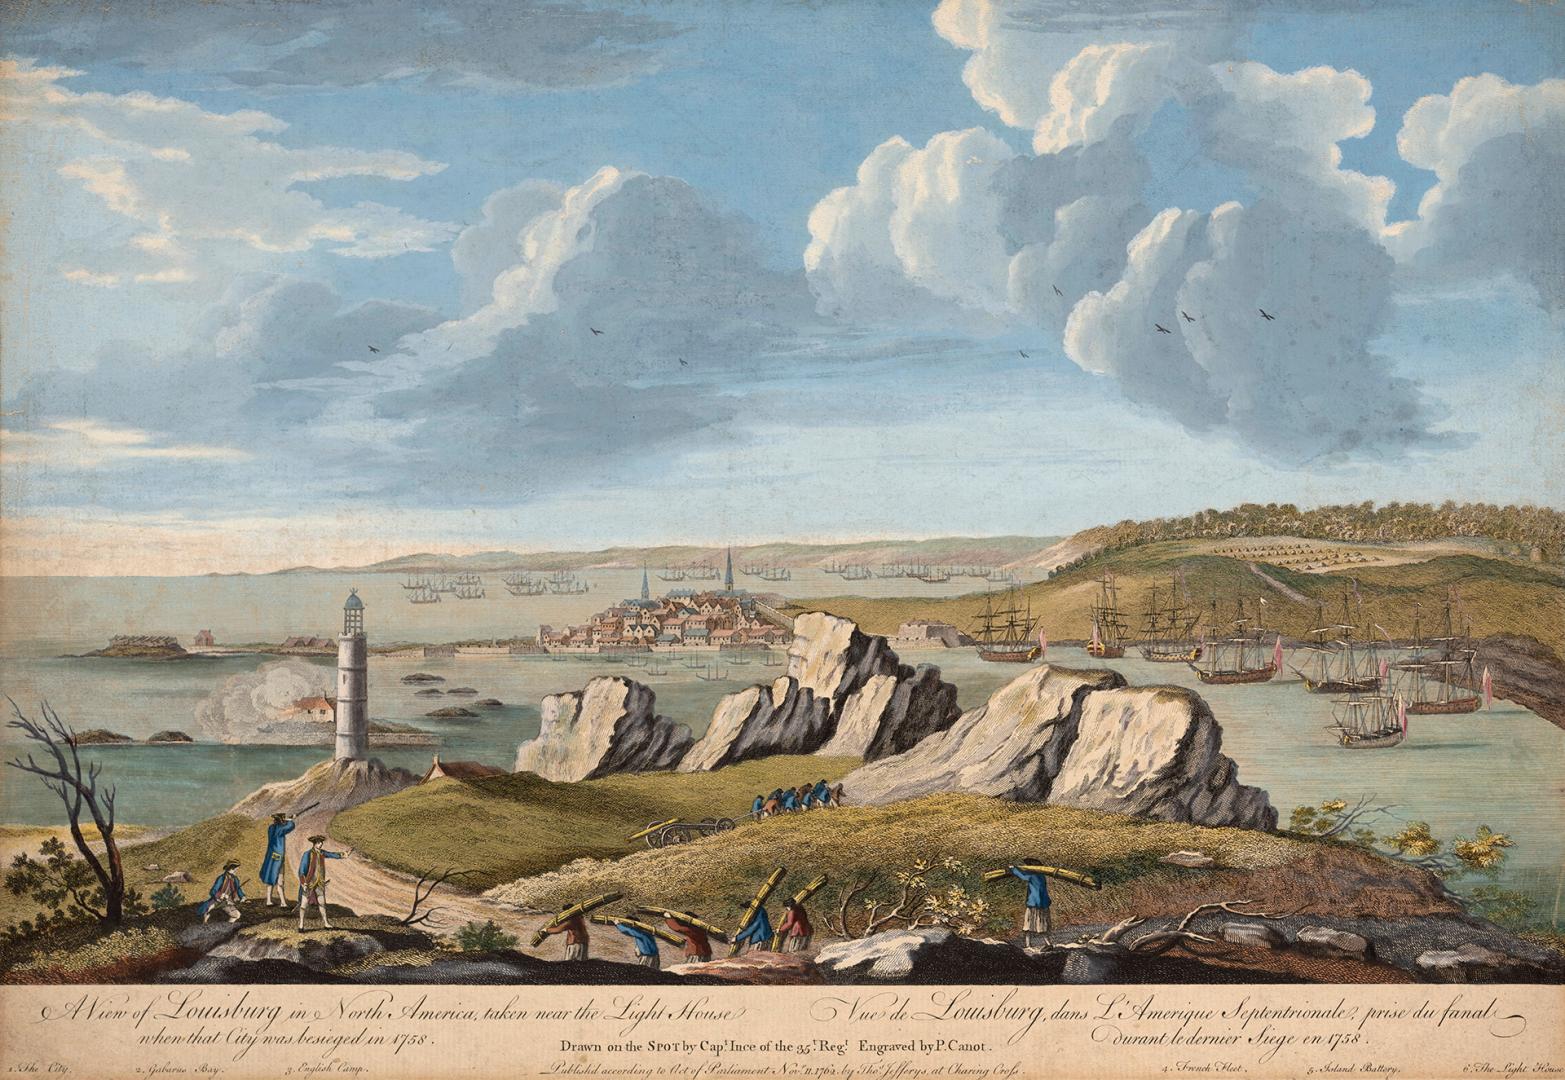 An illustration of a coastal town with a lighthouse in the foreground.